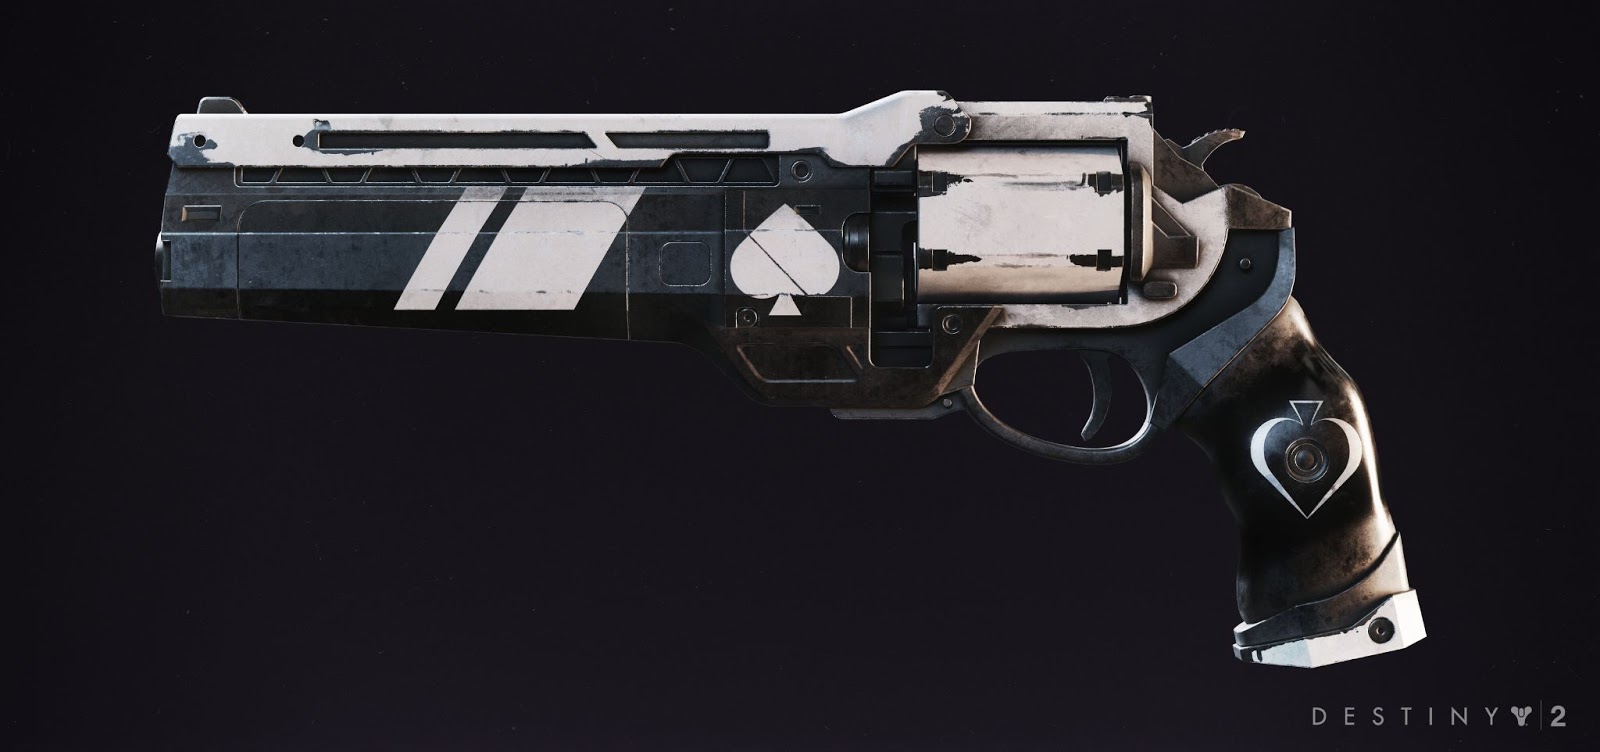 Ace of Spades in Destiny